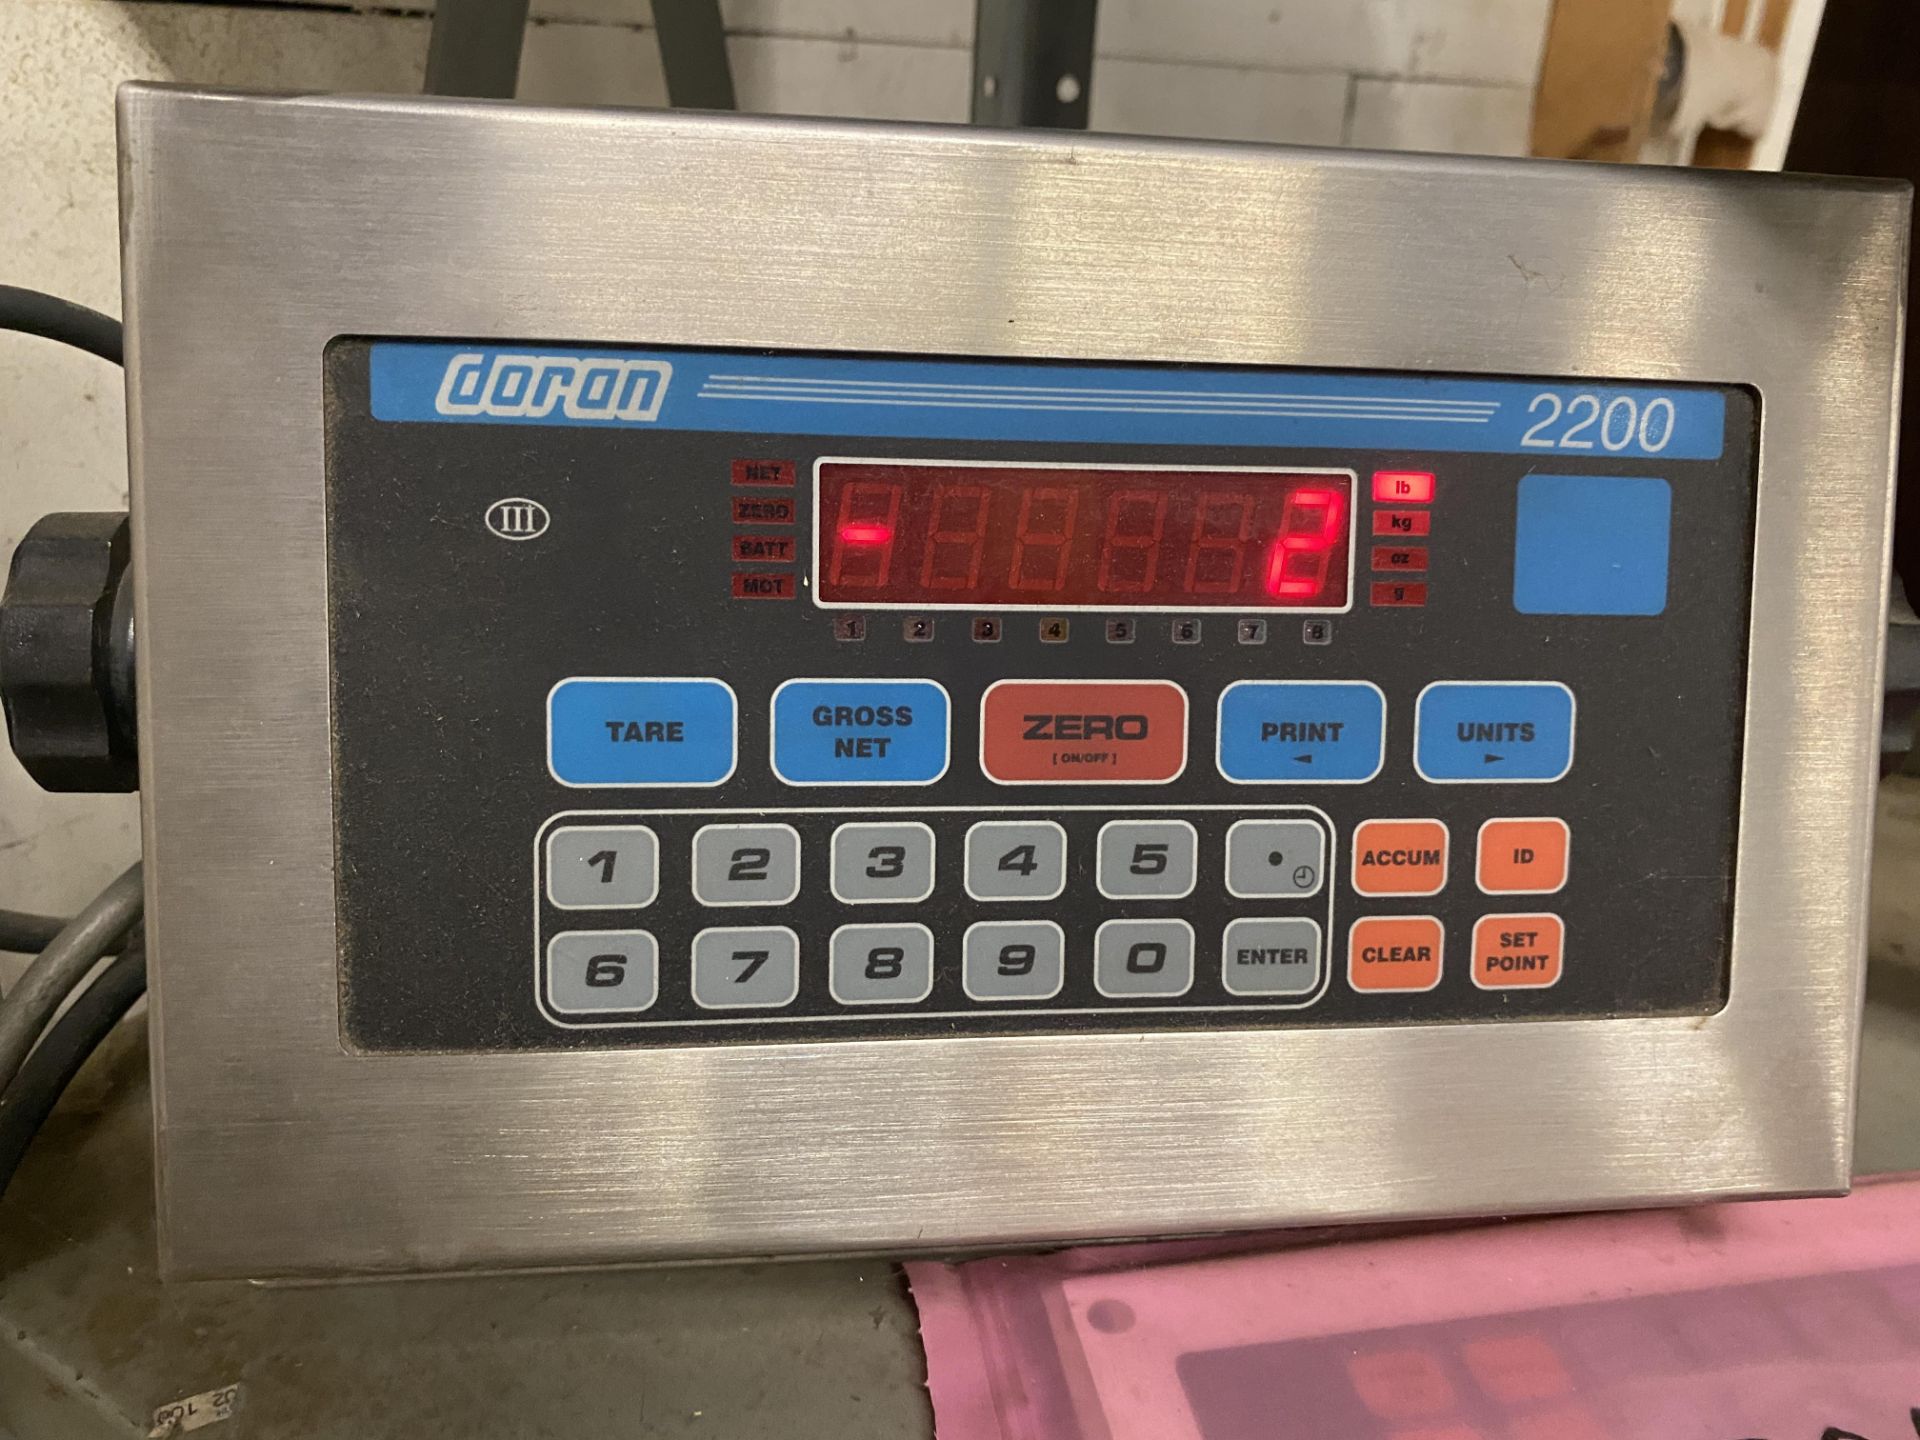 4' X 6' Platform Scale with Doron 2200 Digital Readout - Image 2 of 4